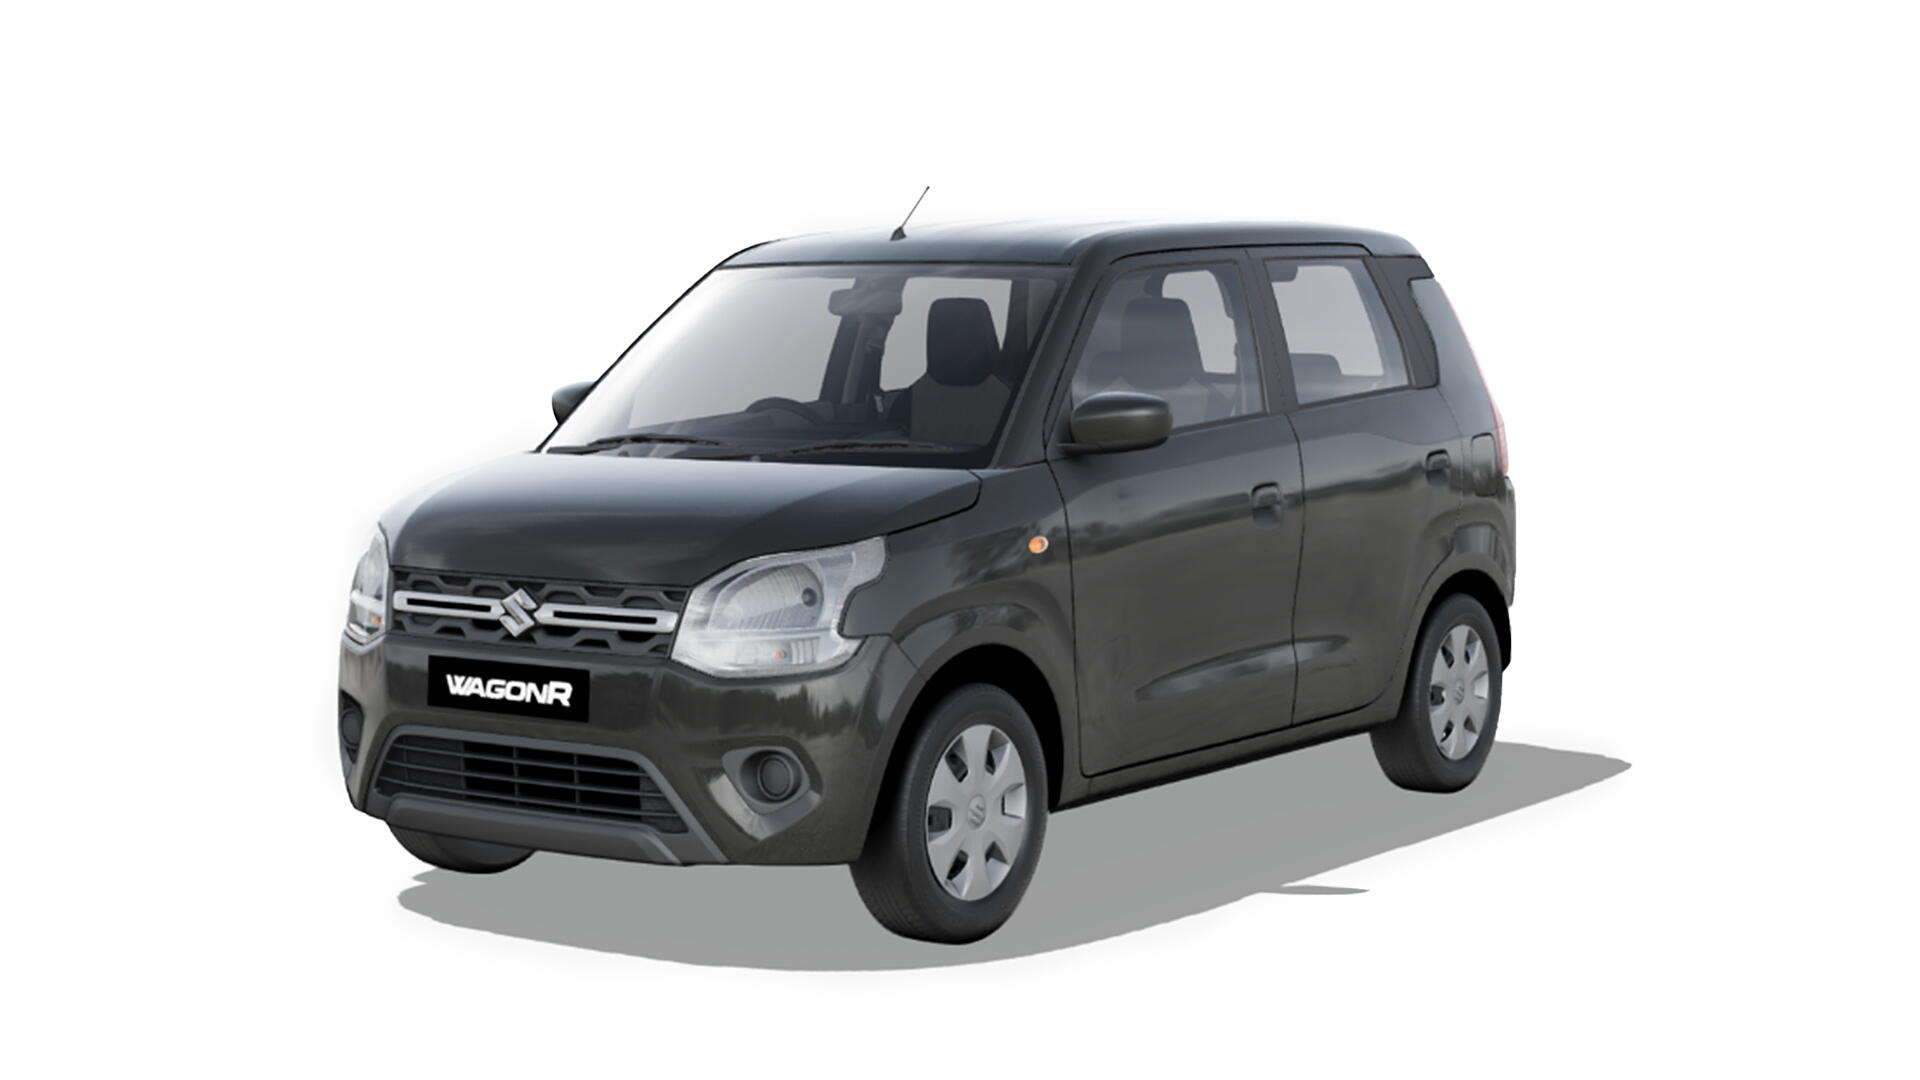 Maruti Wagon R ZXI 1.2 On Road Price, Specs, Review, Images, Colours |  CarTrade